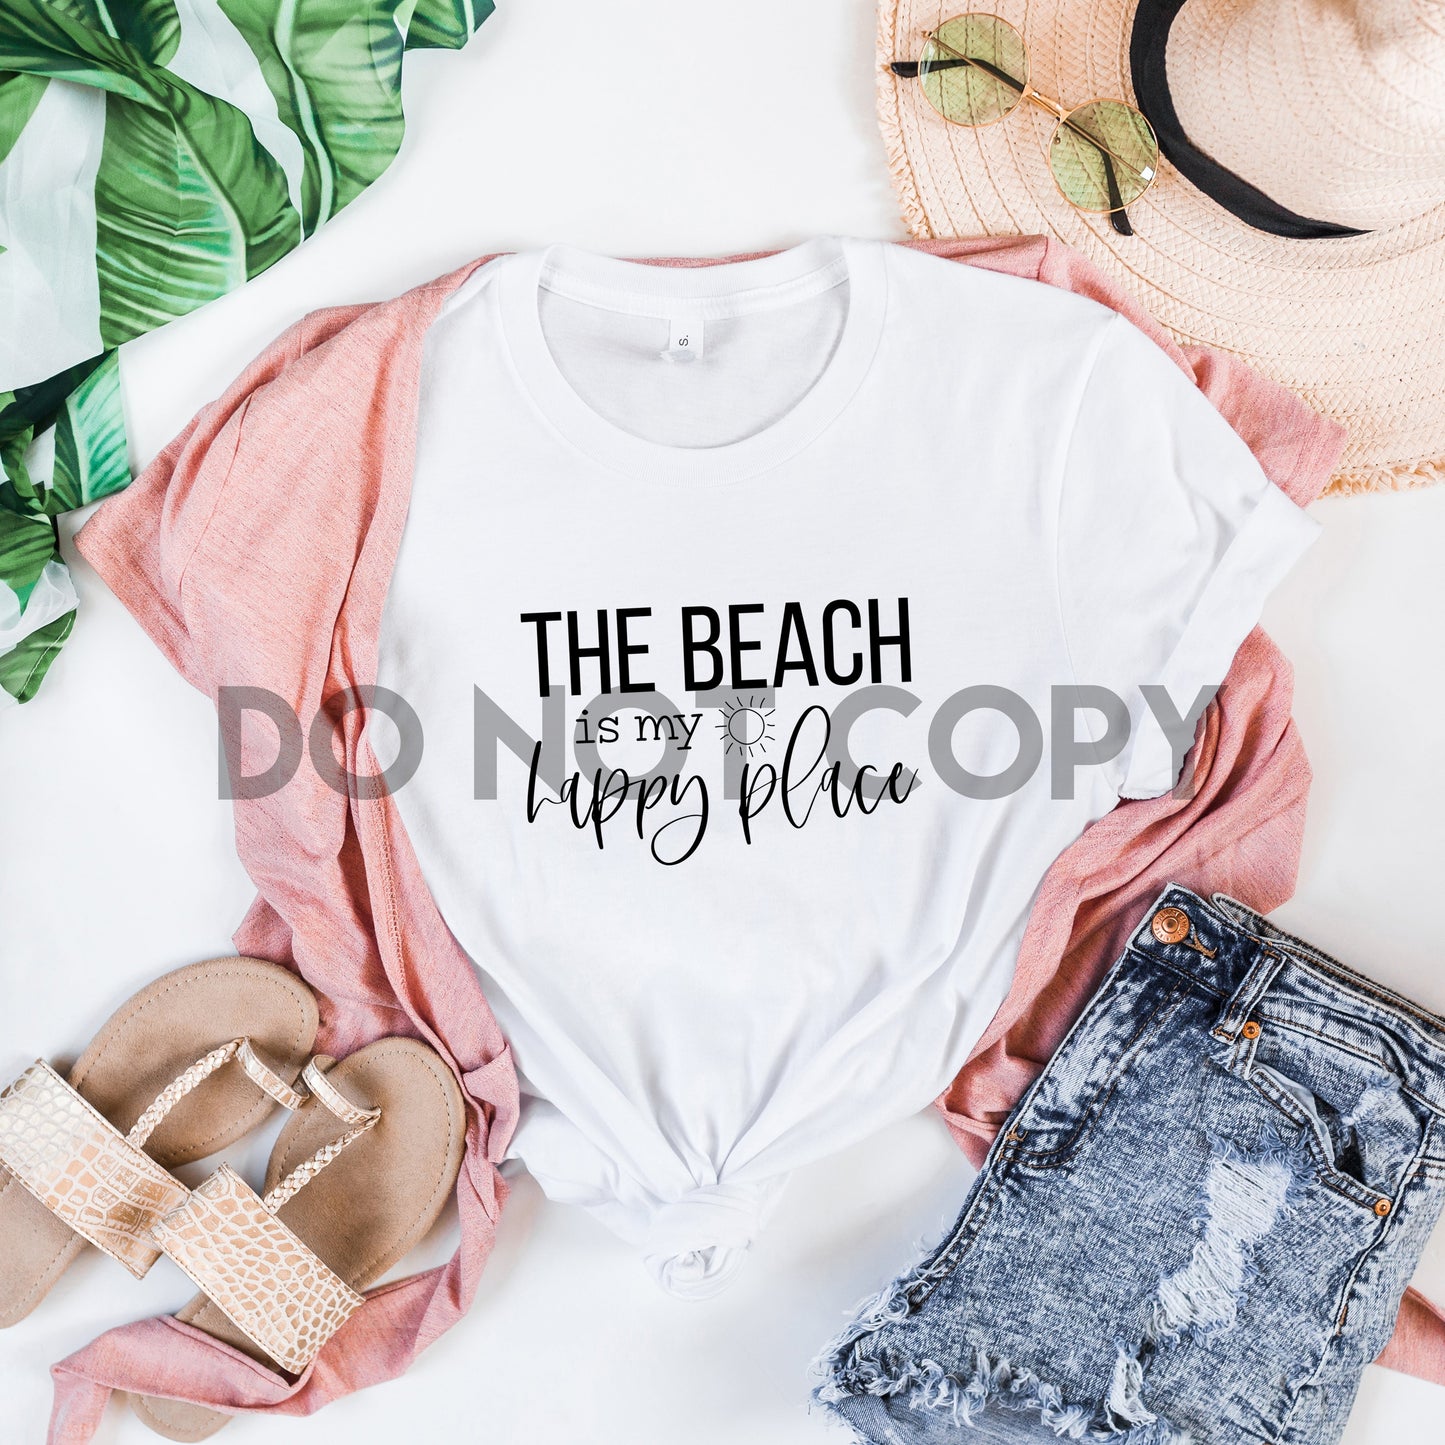 The Beach Is My Happy Place Sublimation print